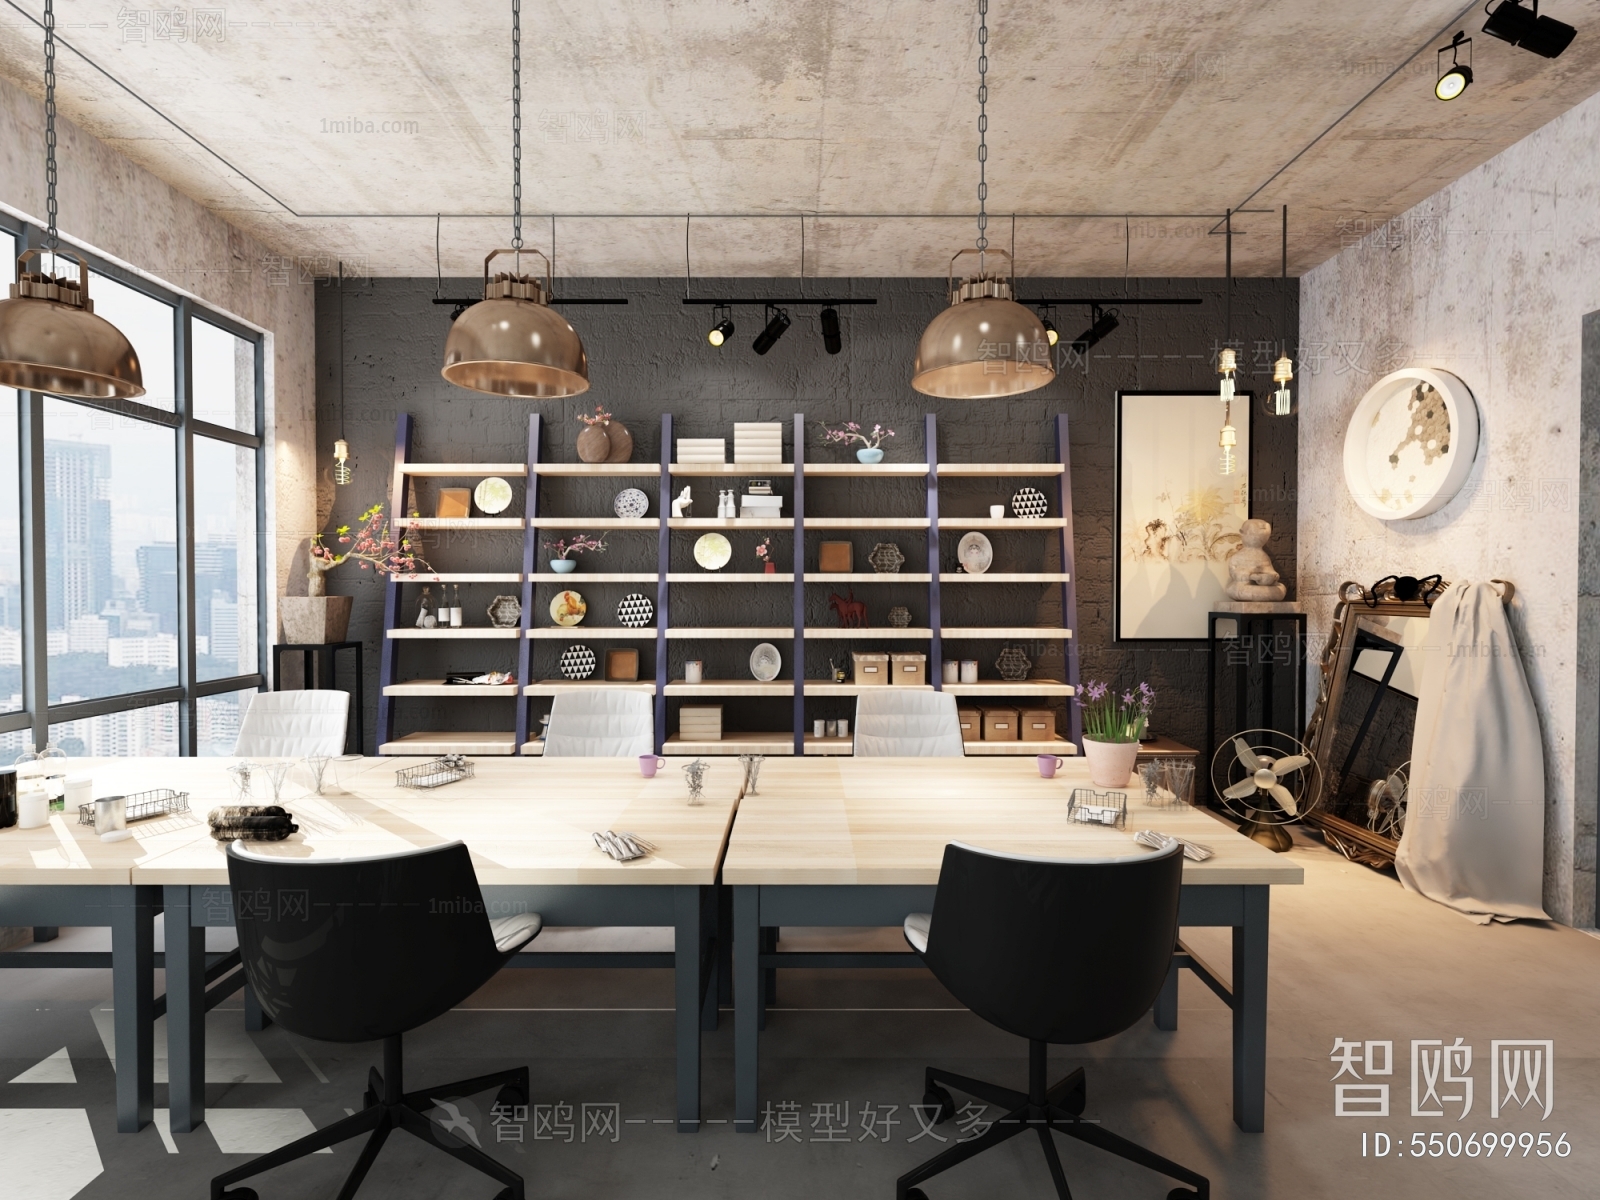 Industrial Style Staff Area